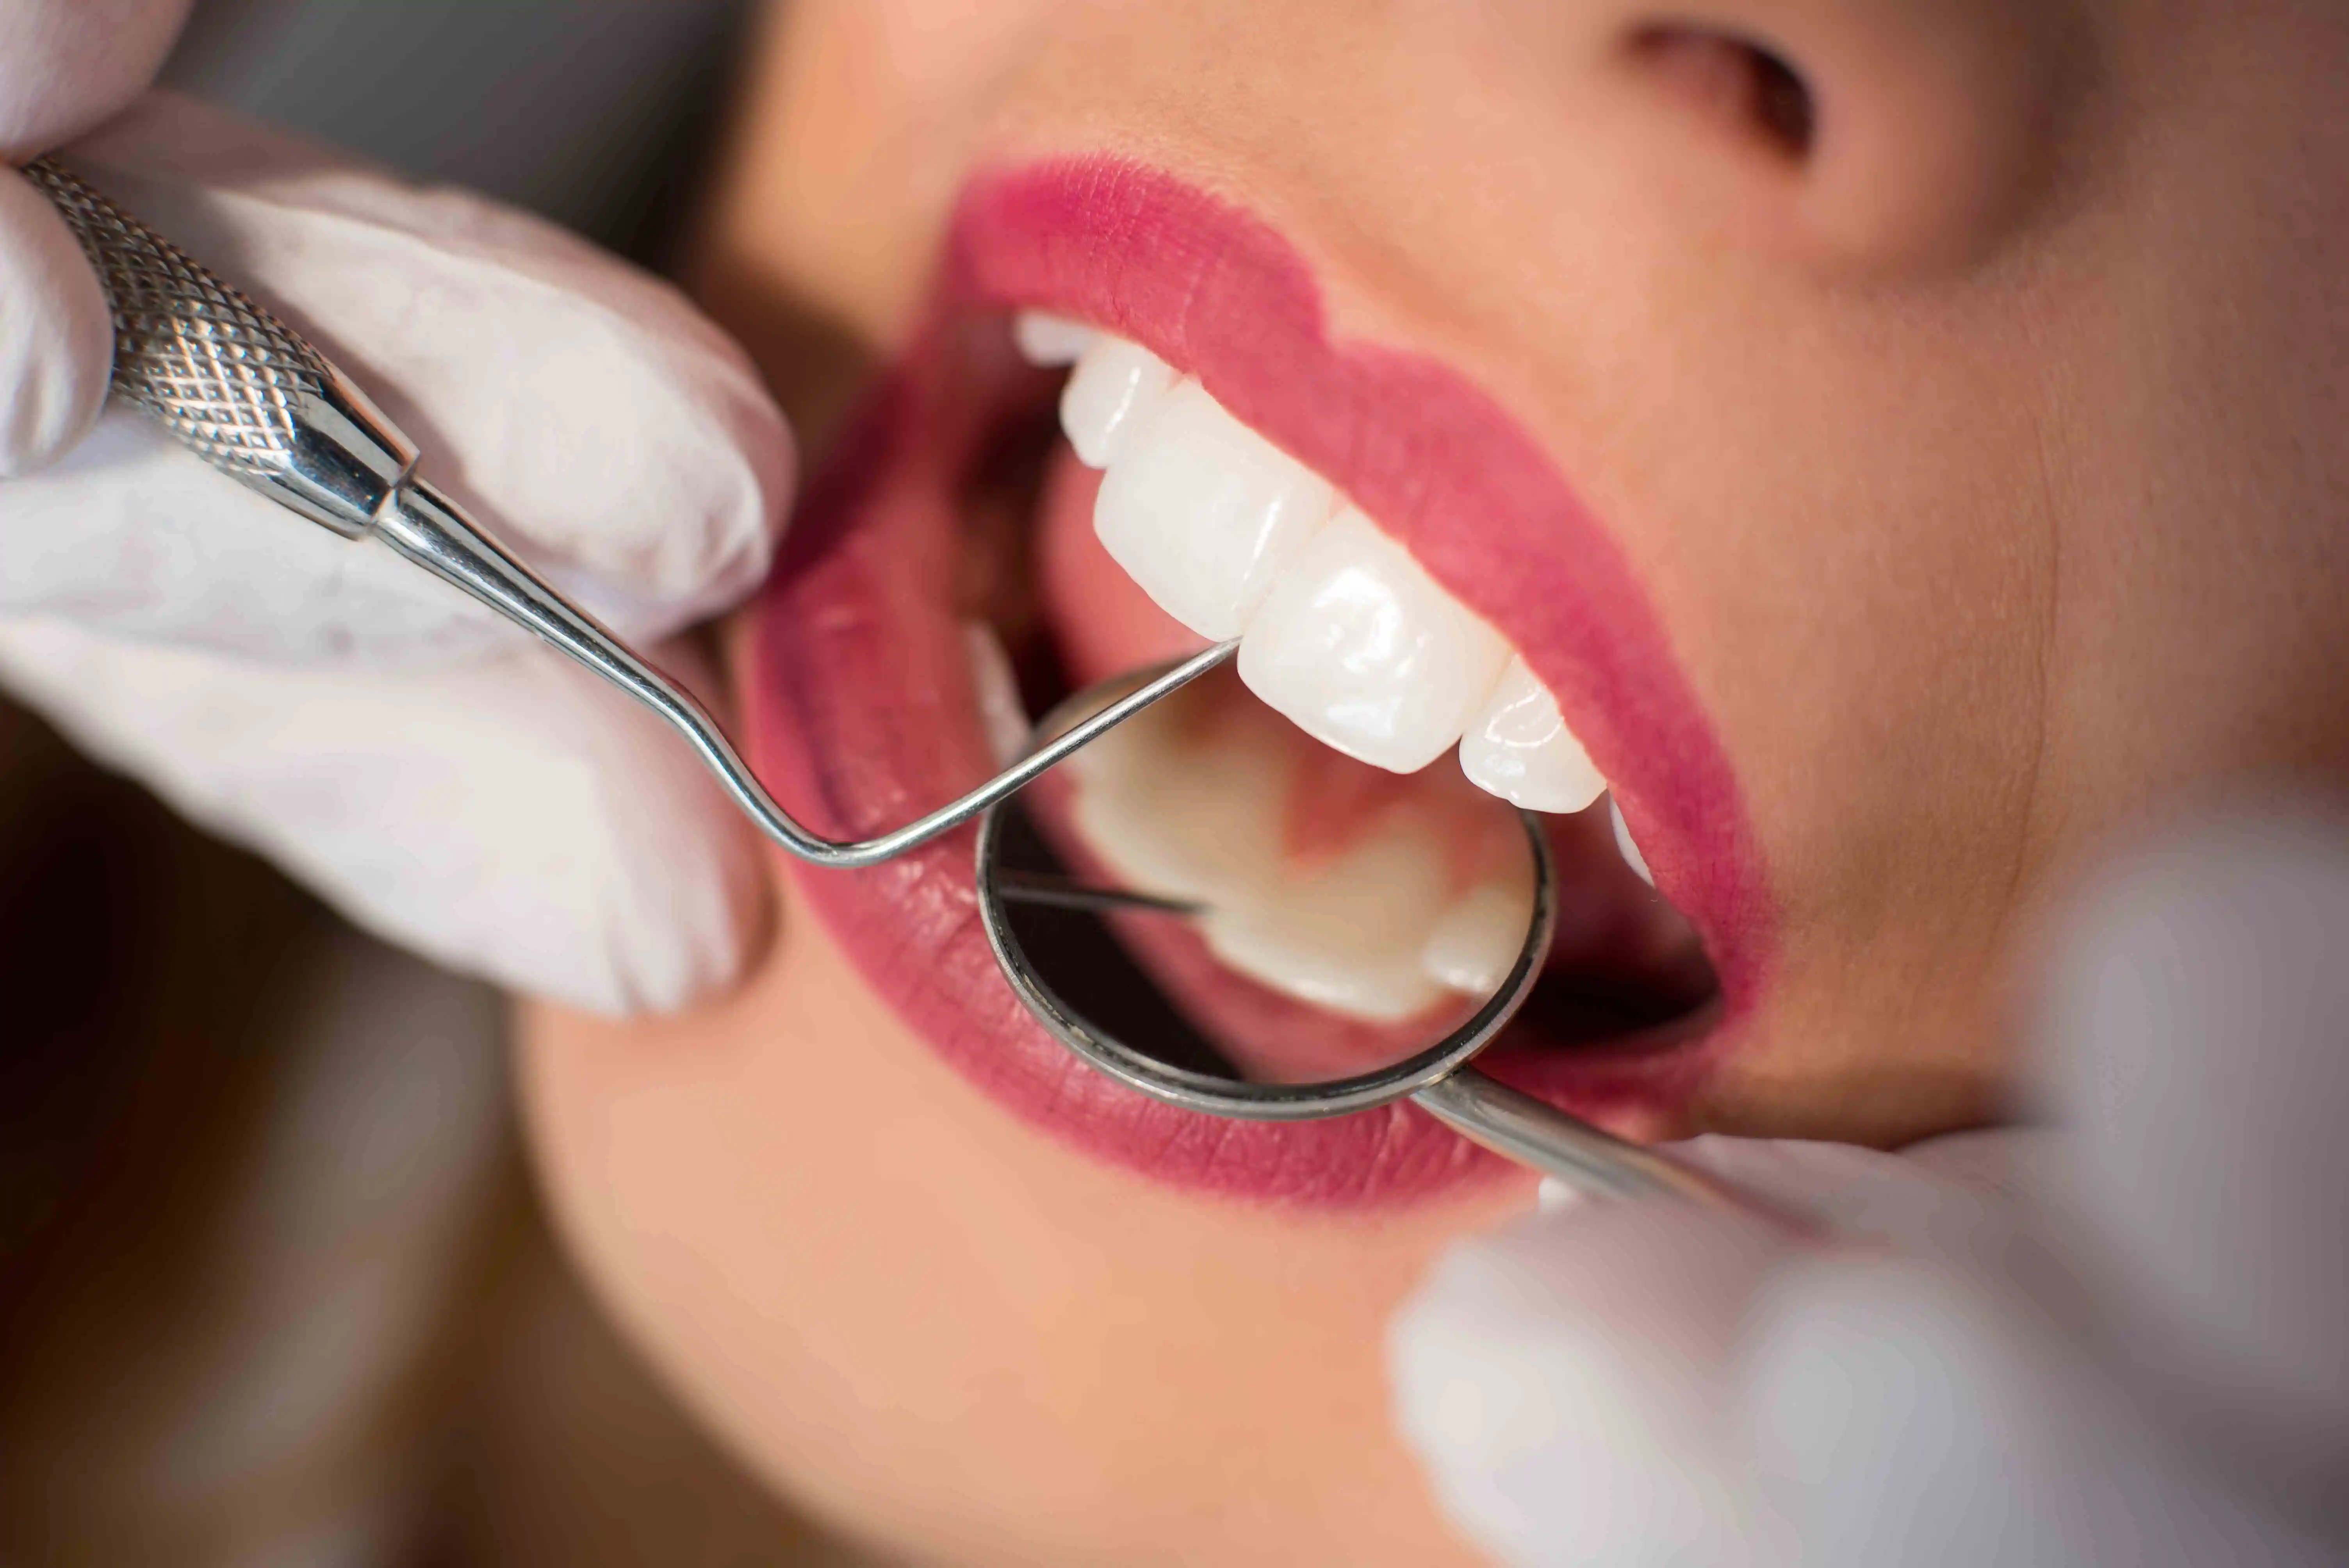 Improving Your Oral Health